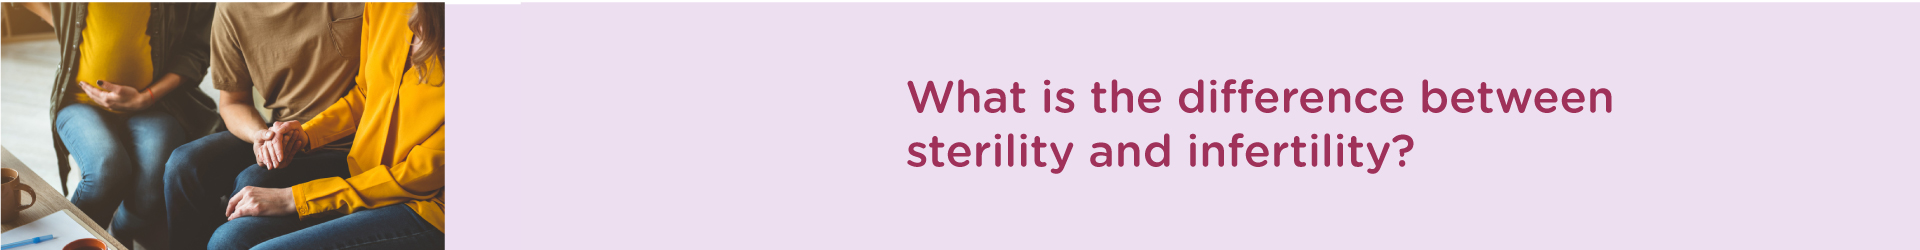 What is the Difference Between Sterility and Infertility?